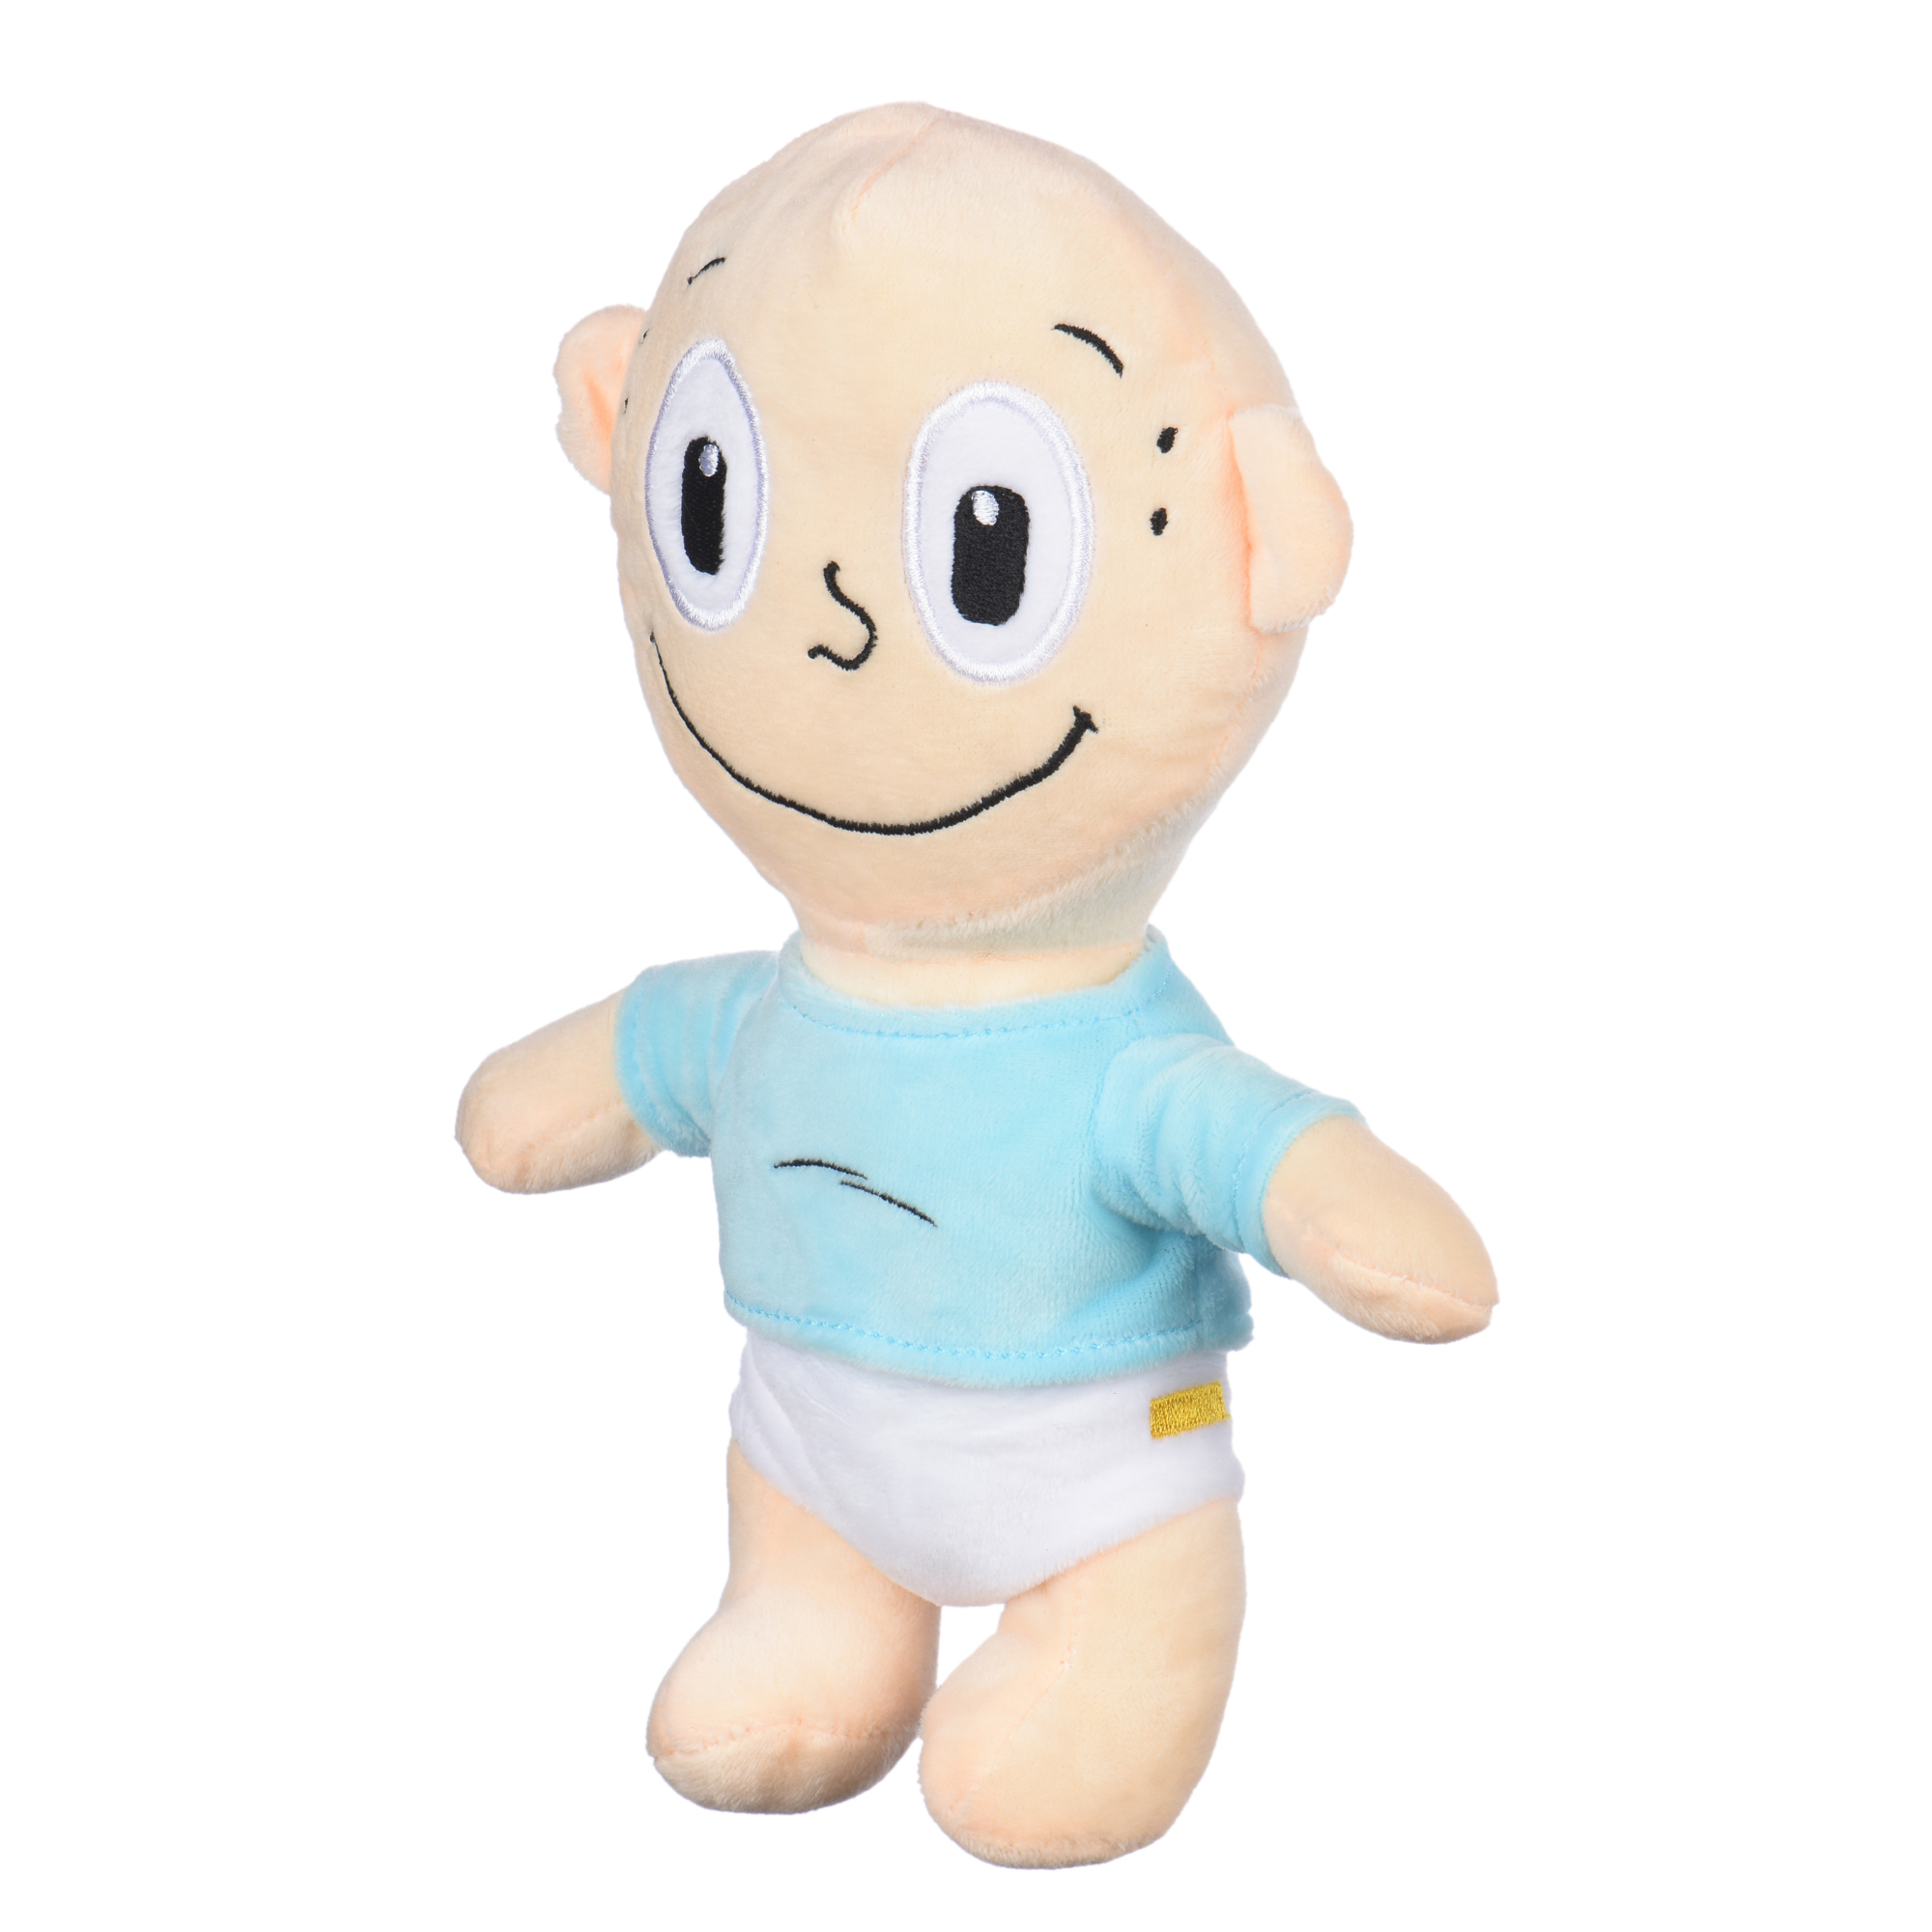 Nickelodeon Rugrats Tommy Pickles Figure Plush Dog Toy, 9 Inch